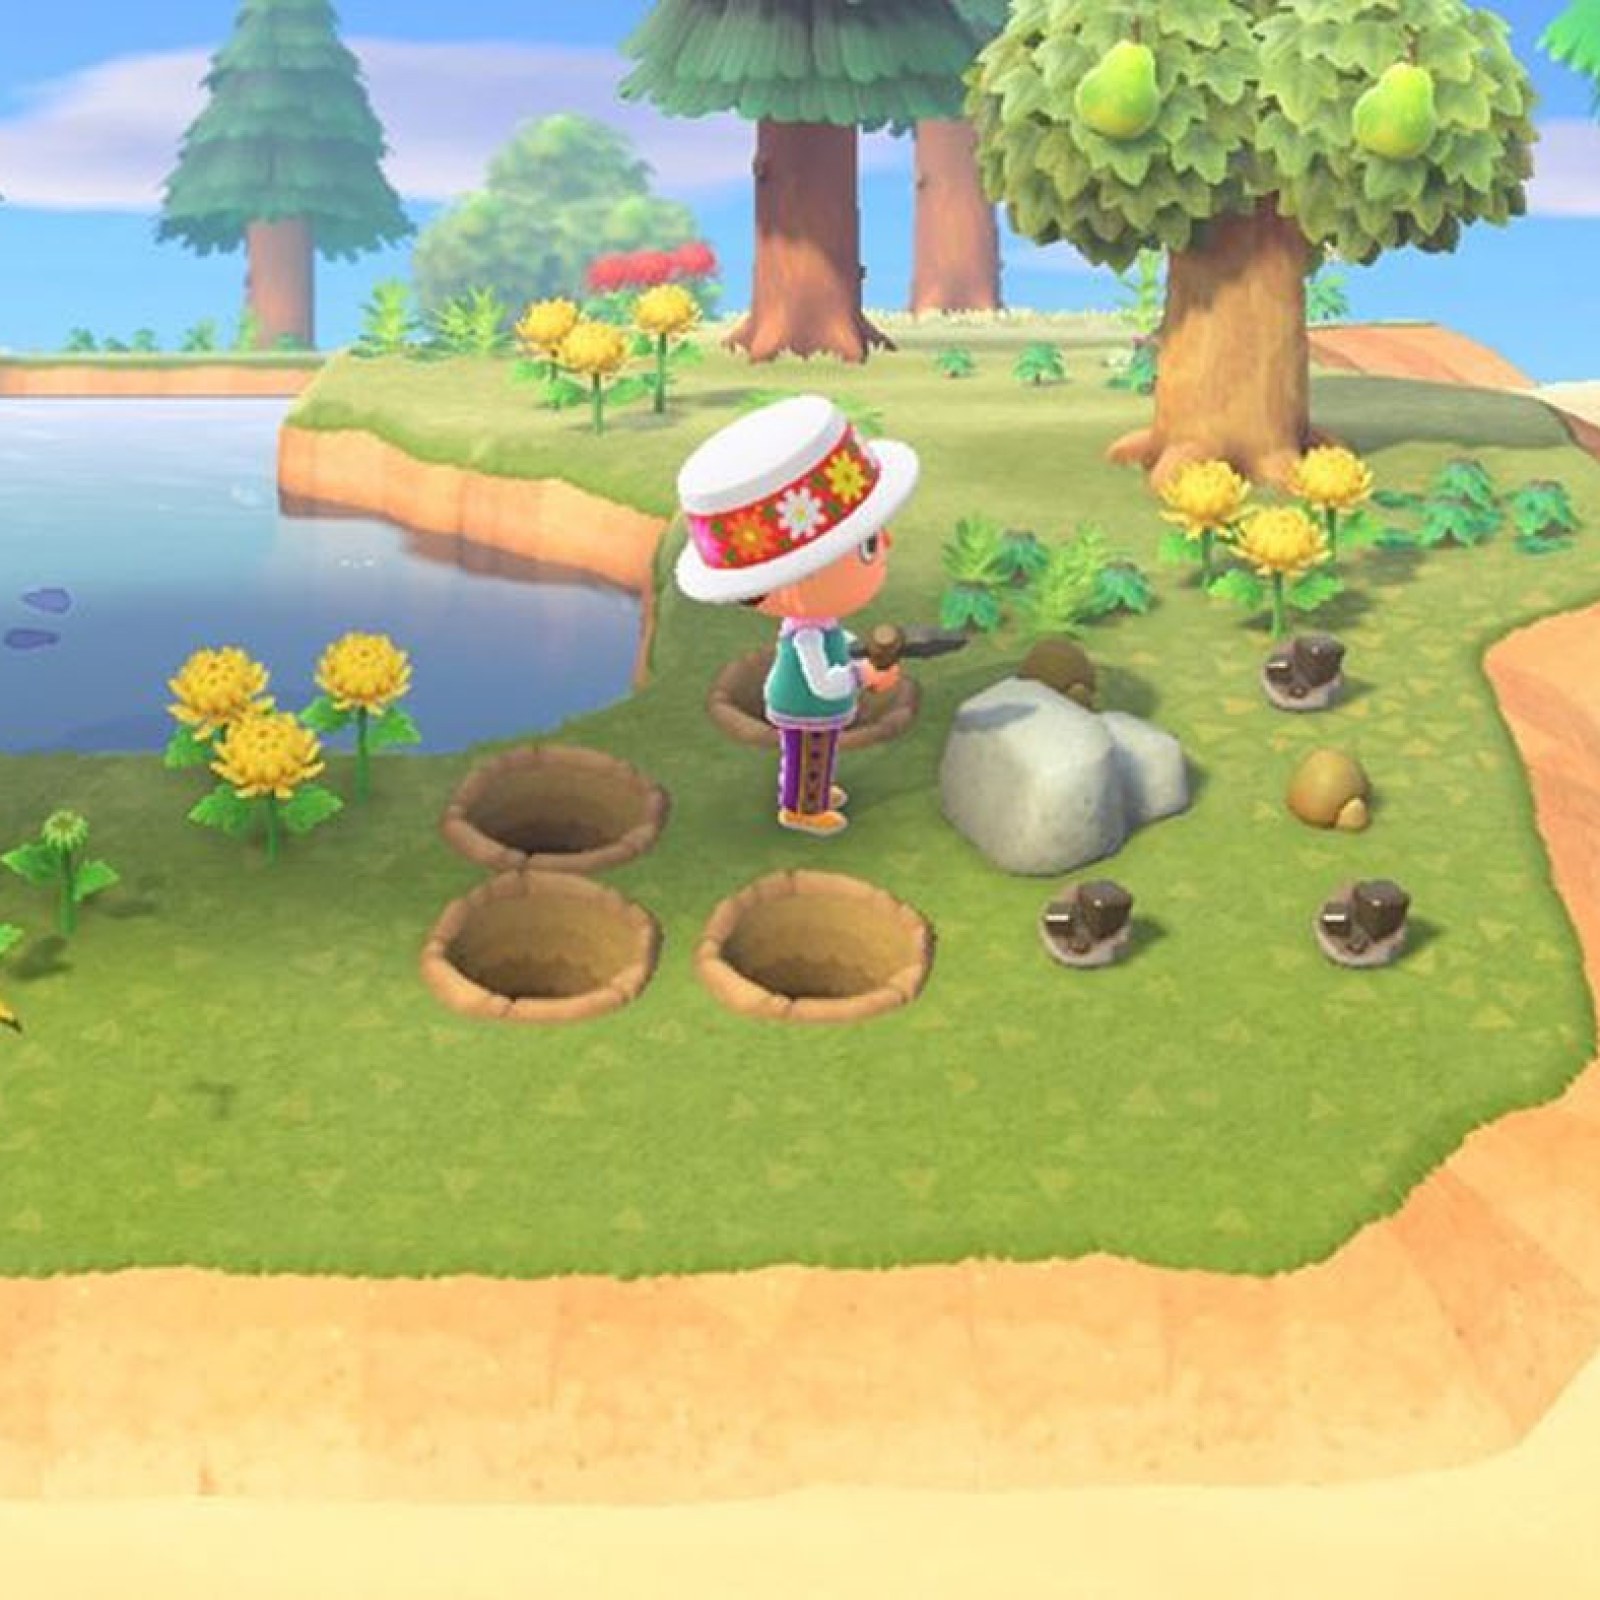 How To Get Hardwood In Animal Crossing?